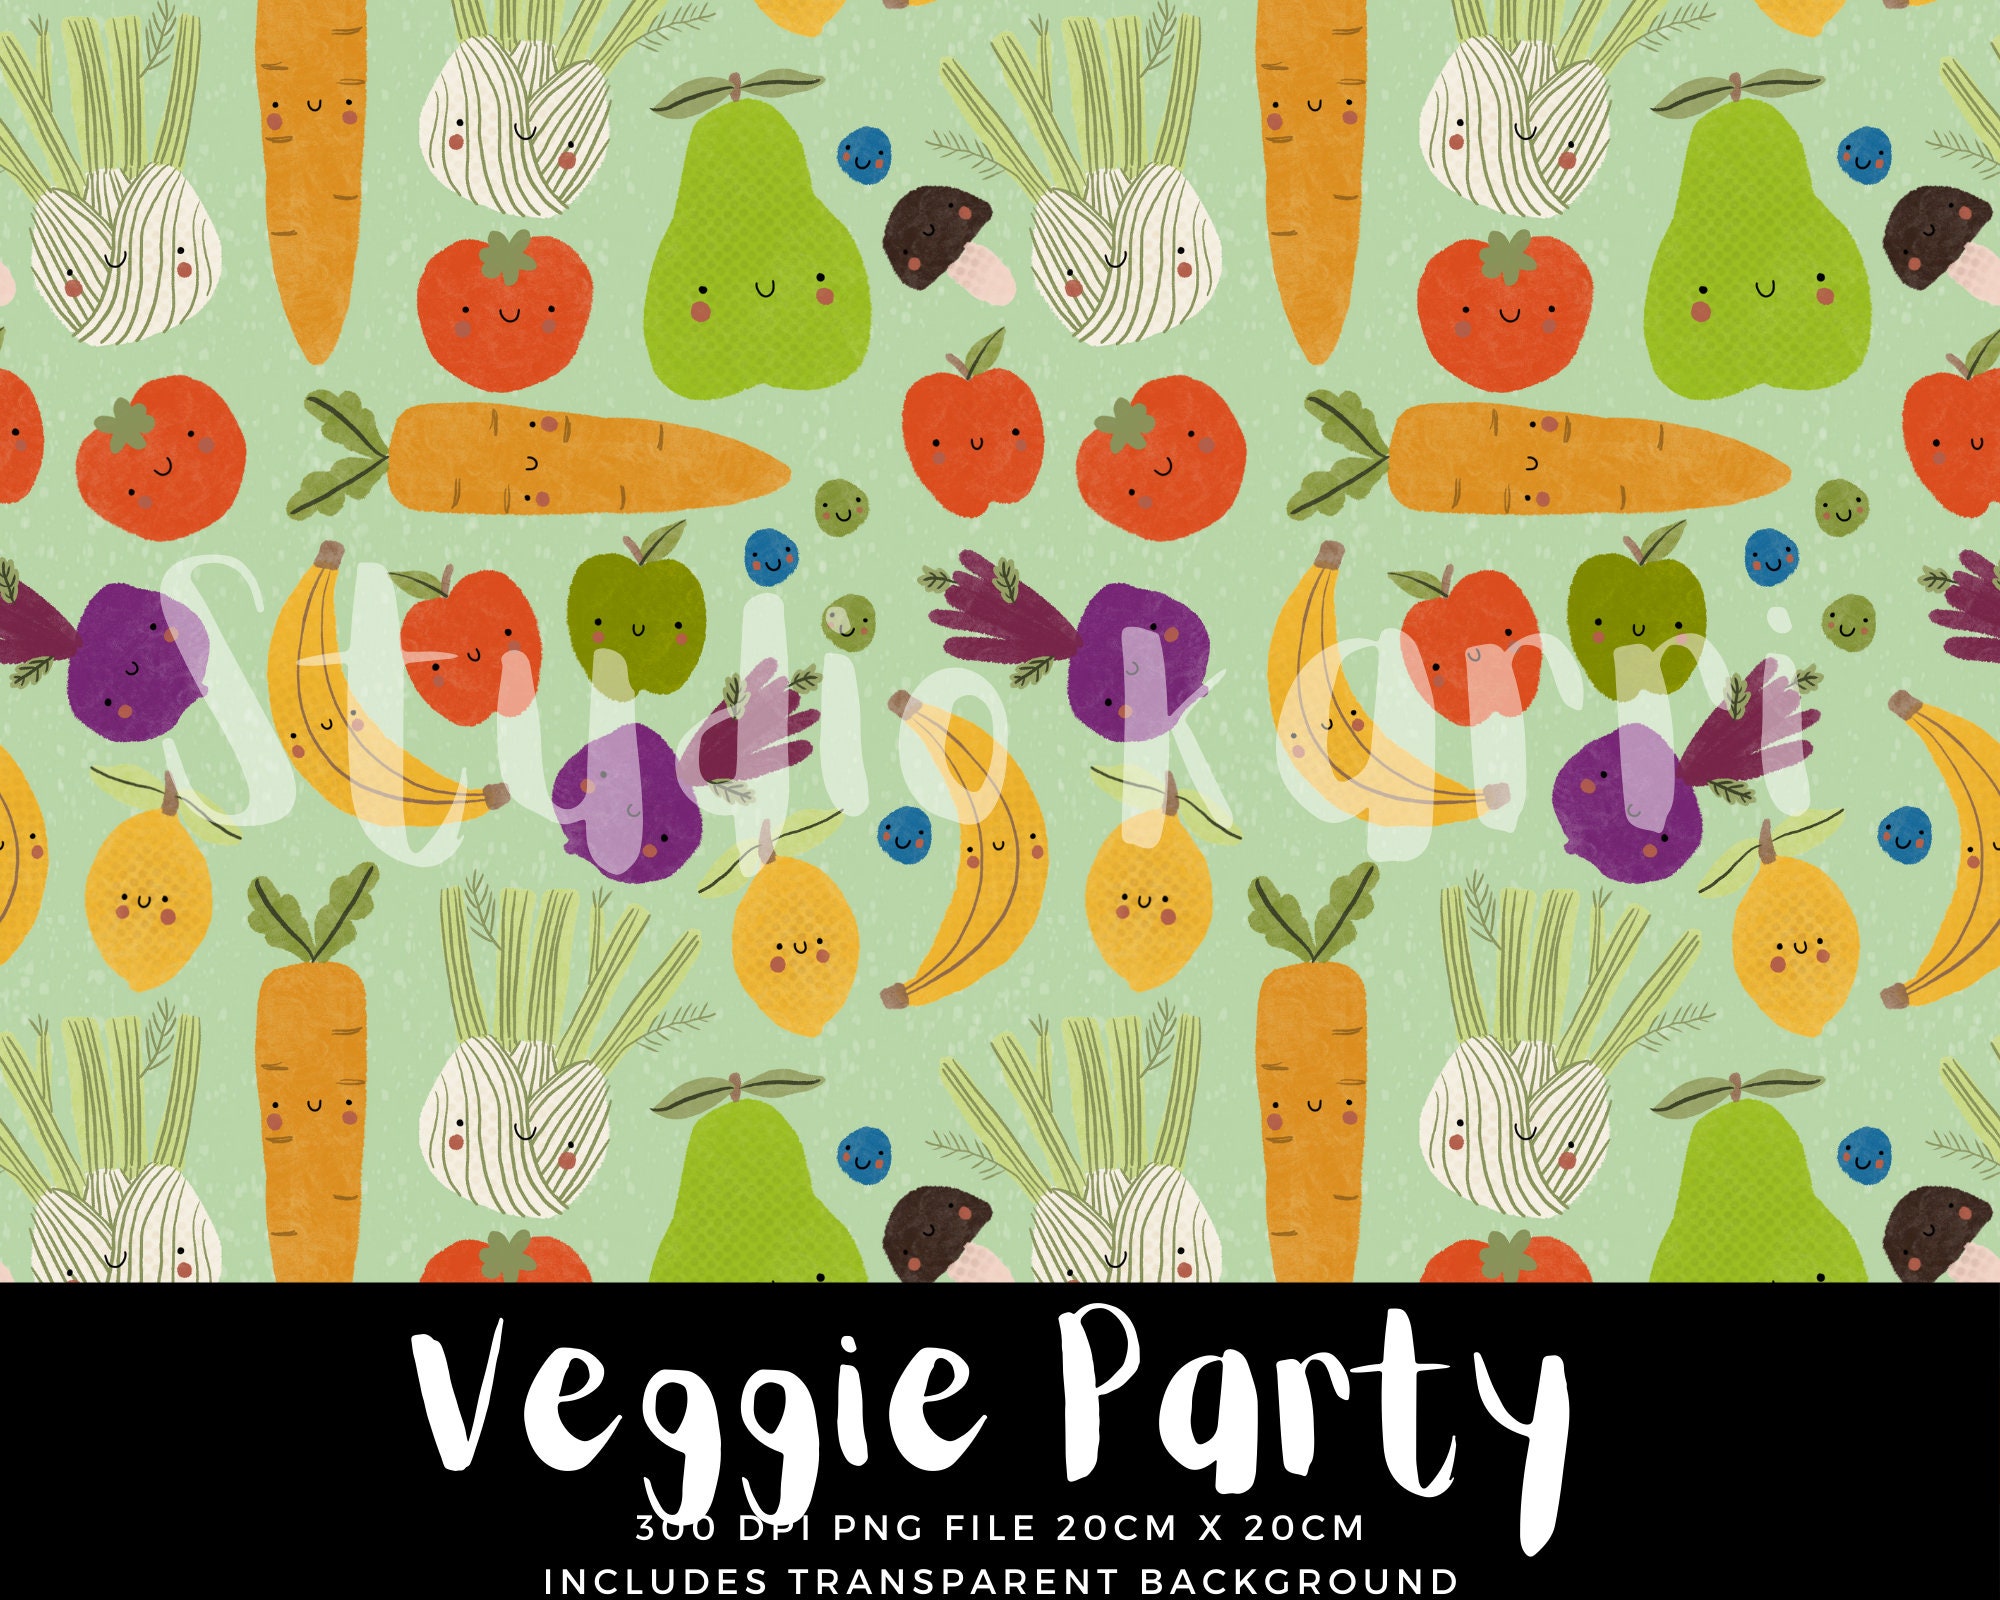 Fruit and Veggie Embroidery Patterns Water Soluble Visible Mending  Embroidery Transfers Hand Embroidery Designs 